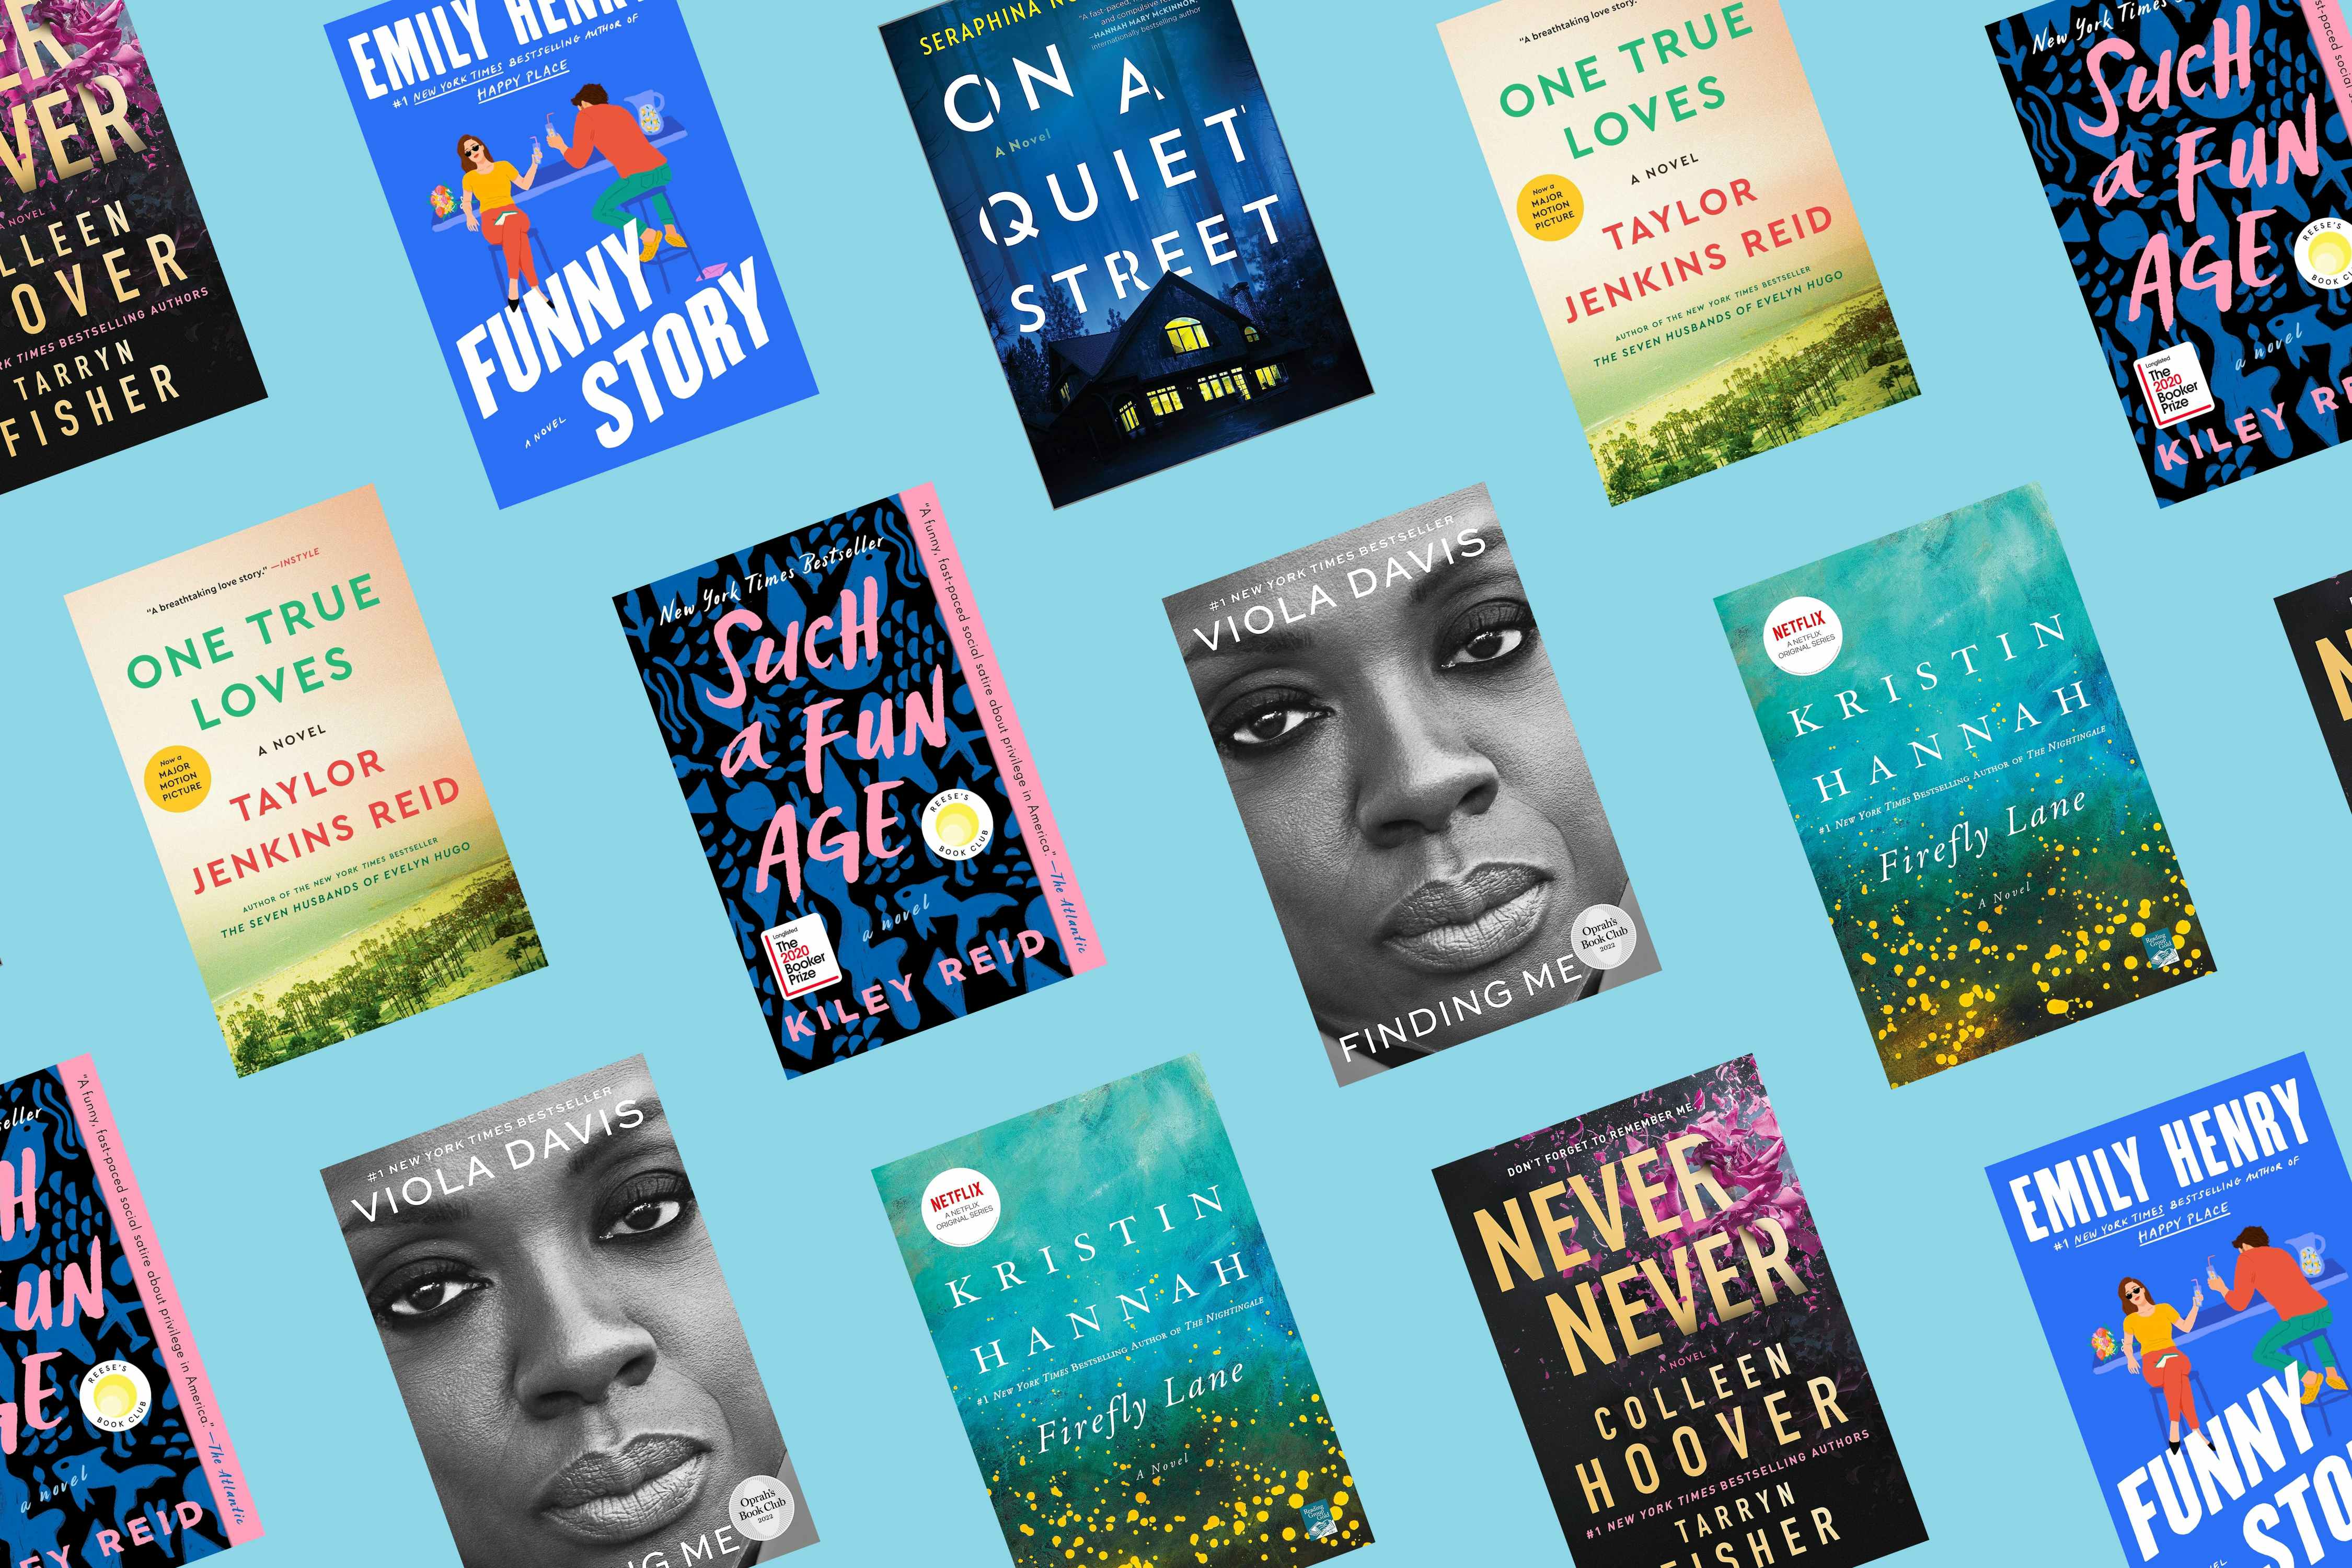 Amazon's Book Sale Features Cheap Summer Reads (Emily Henry, Colleen Hoover!)